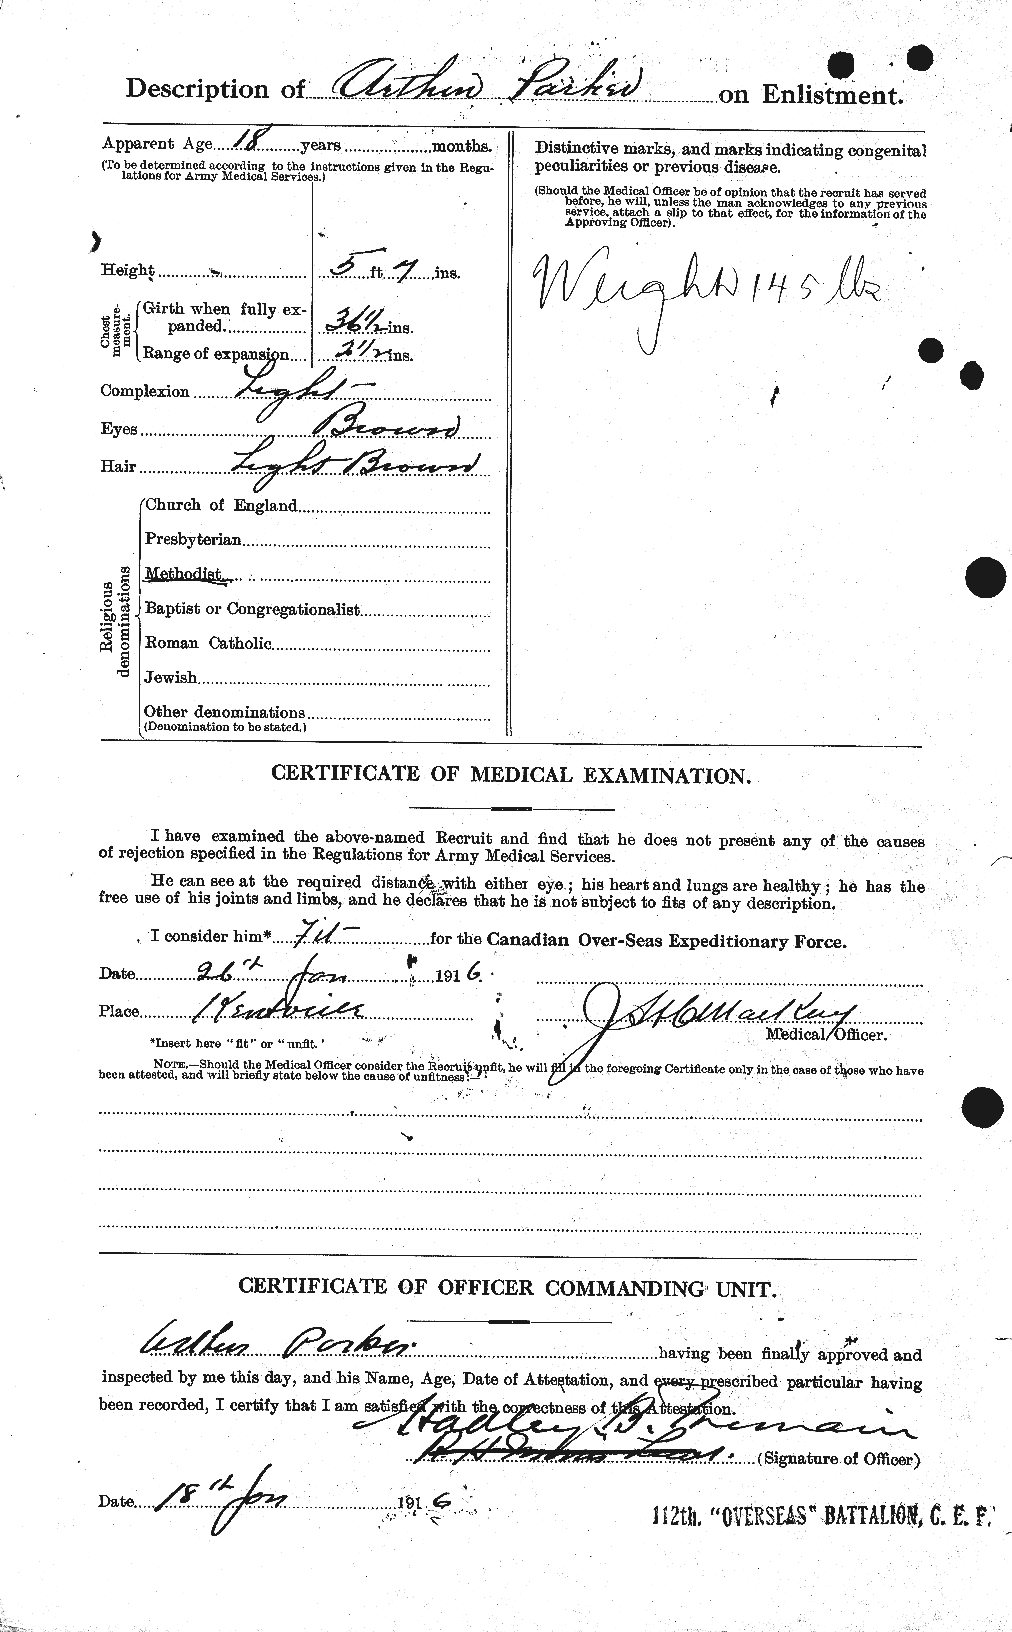 Personnel Records of the First World War - CEF 565013b